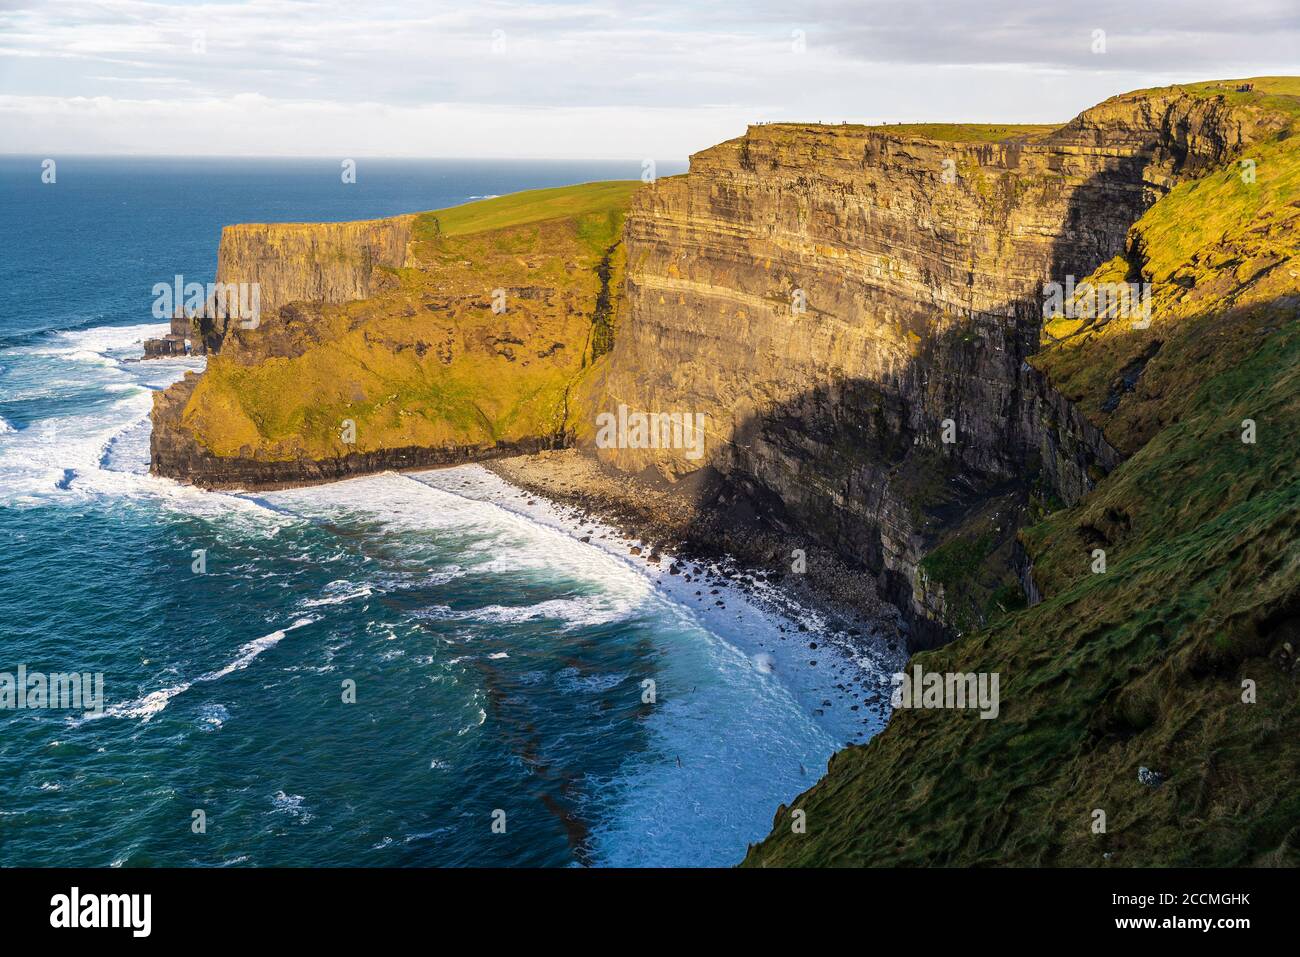 Cliffs of Moher, sea cliffs located at the southwestern edge of the Burren region in County Clare, Ireland Stock Photo